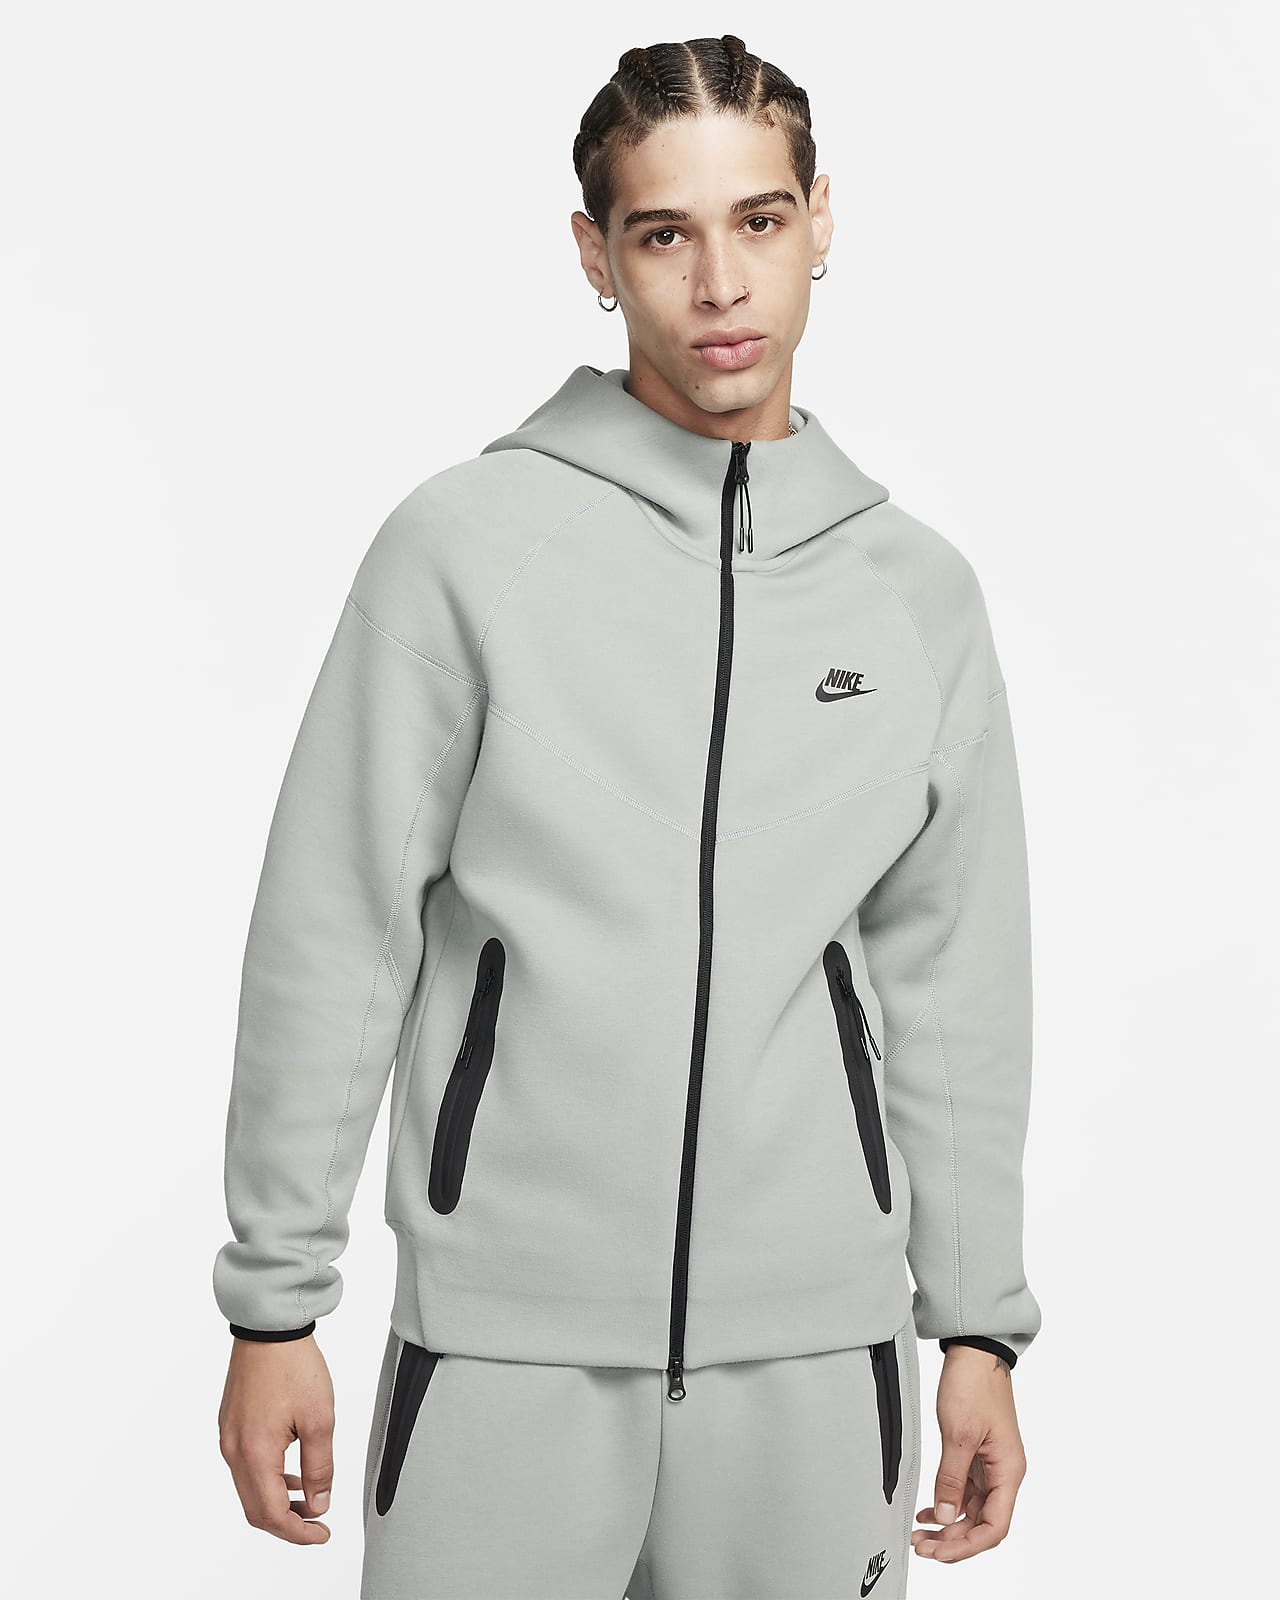 https://static.nike.com/a/images/t_PDP_1280_v1/f_auto,q_auto:eco/c98ab61a-e032-44fe-9666-e45dc7c5e6d5/sportswear-tech-fleece-windrunner-hoodie-hXT8wQ.png